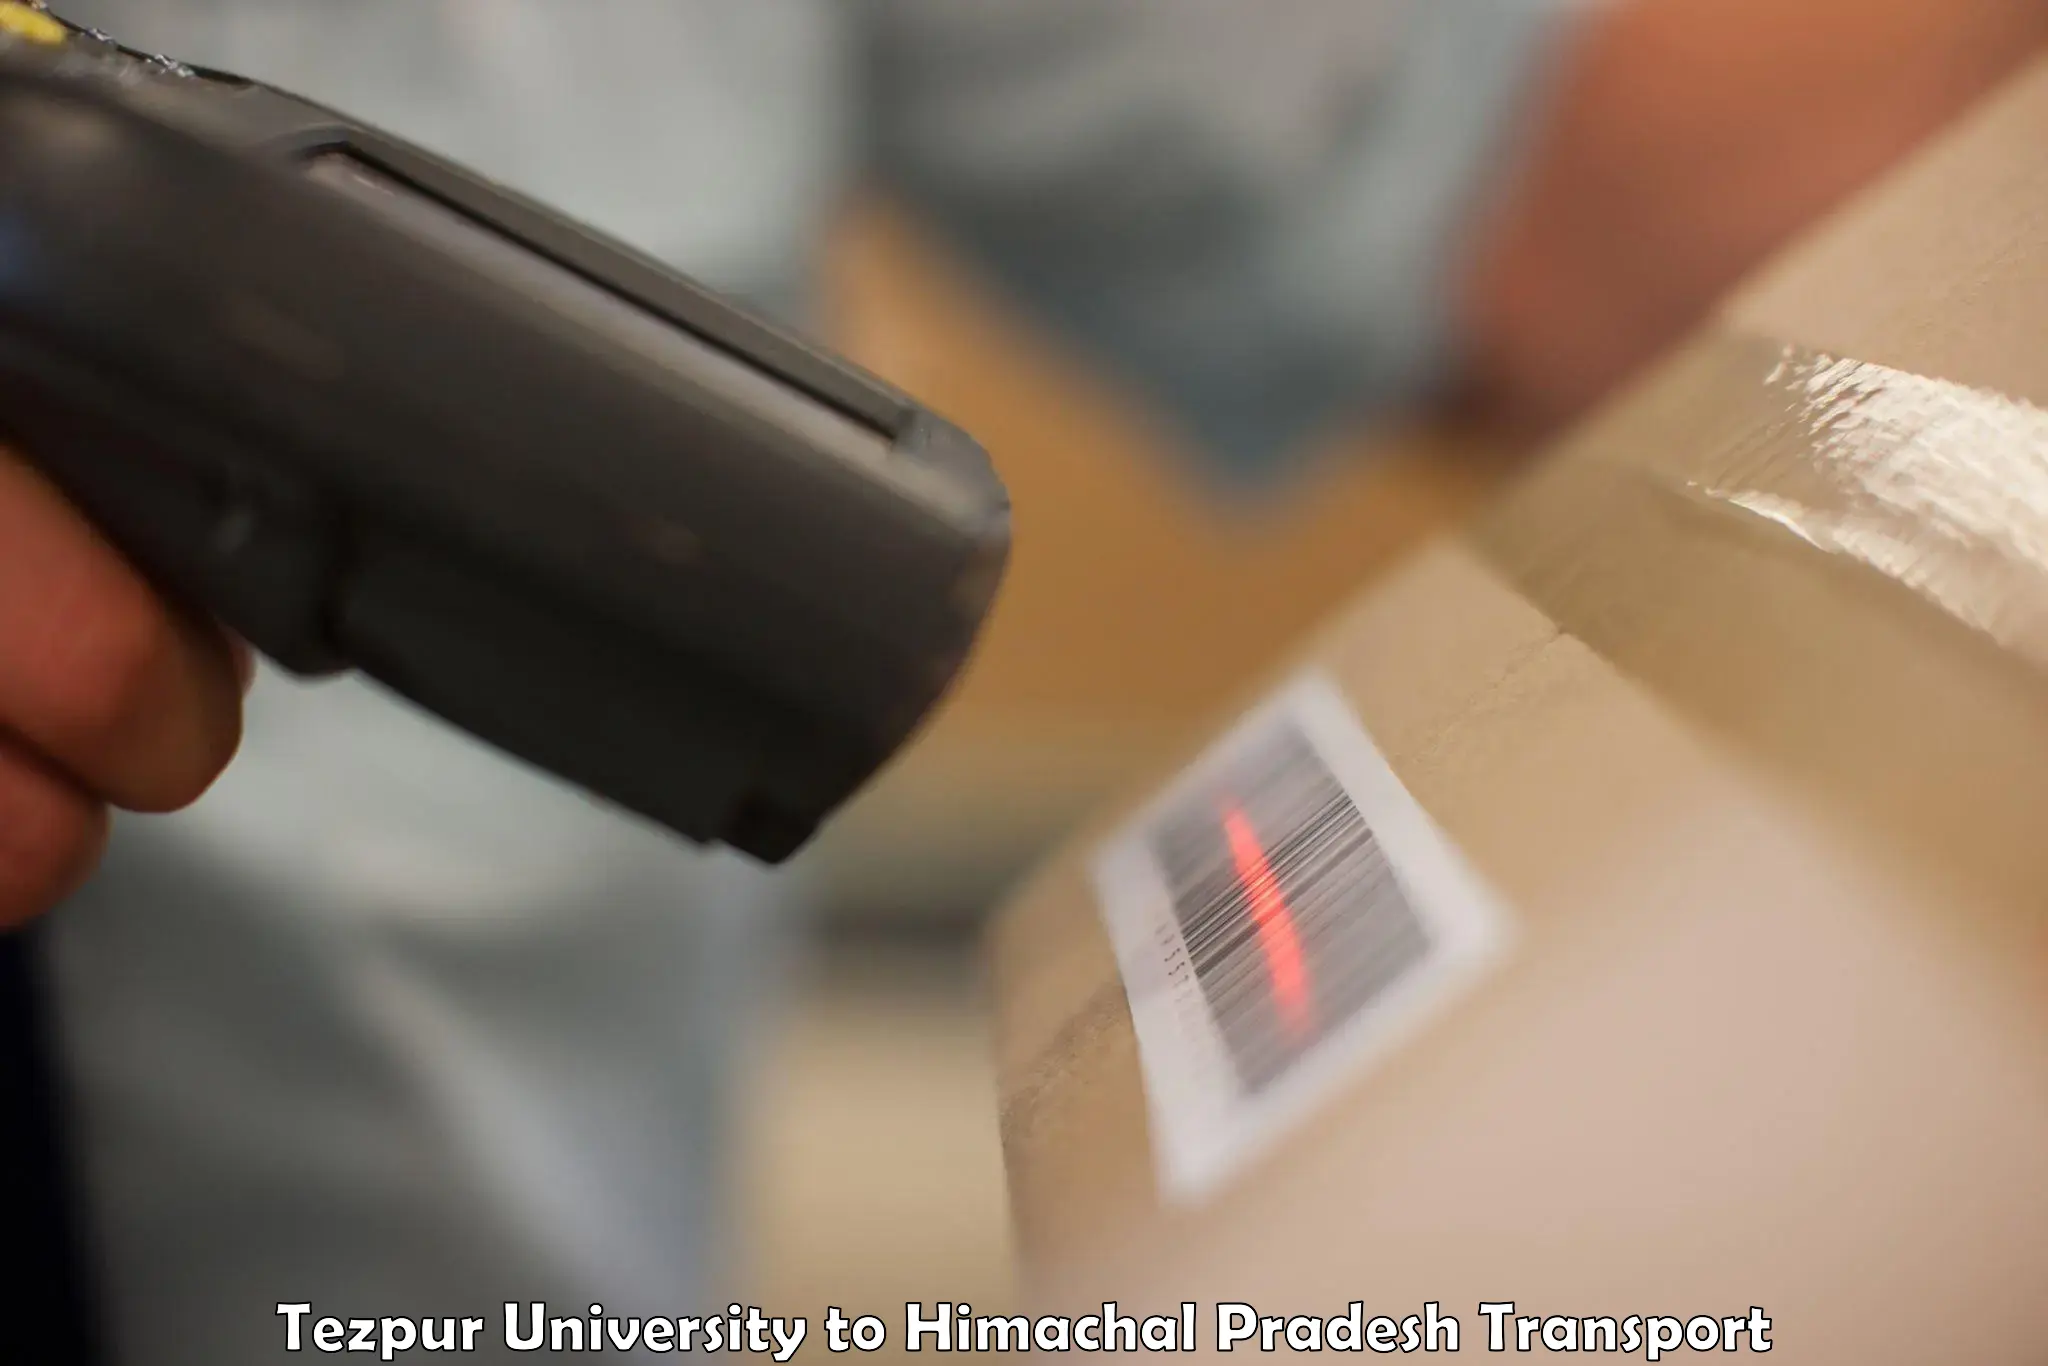 Parcel transport services in Tezpur University to Sujanpur